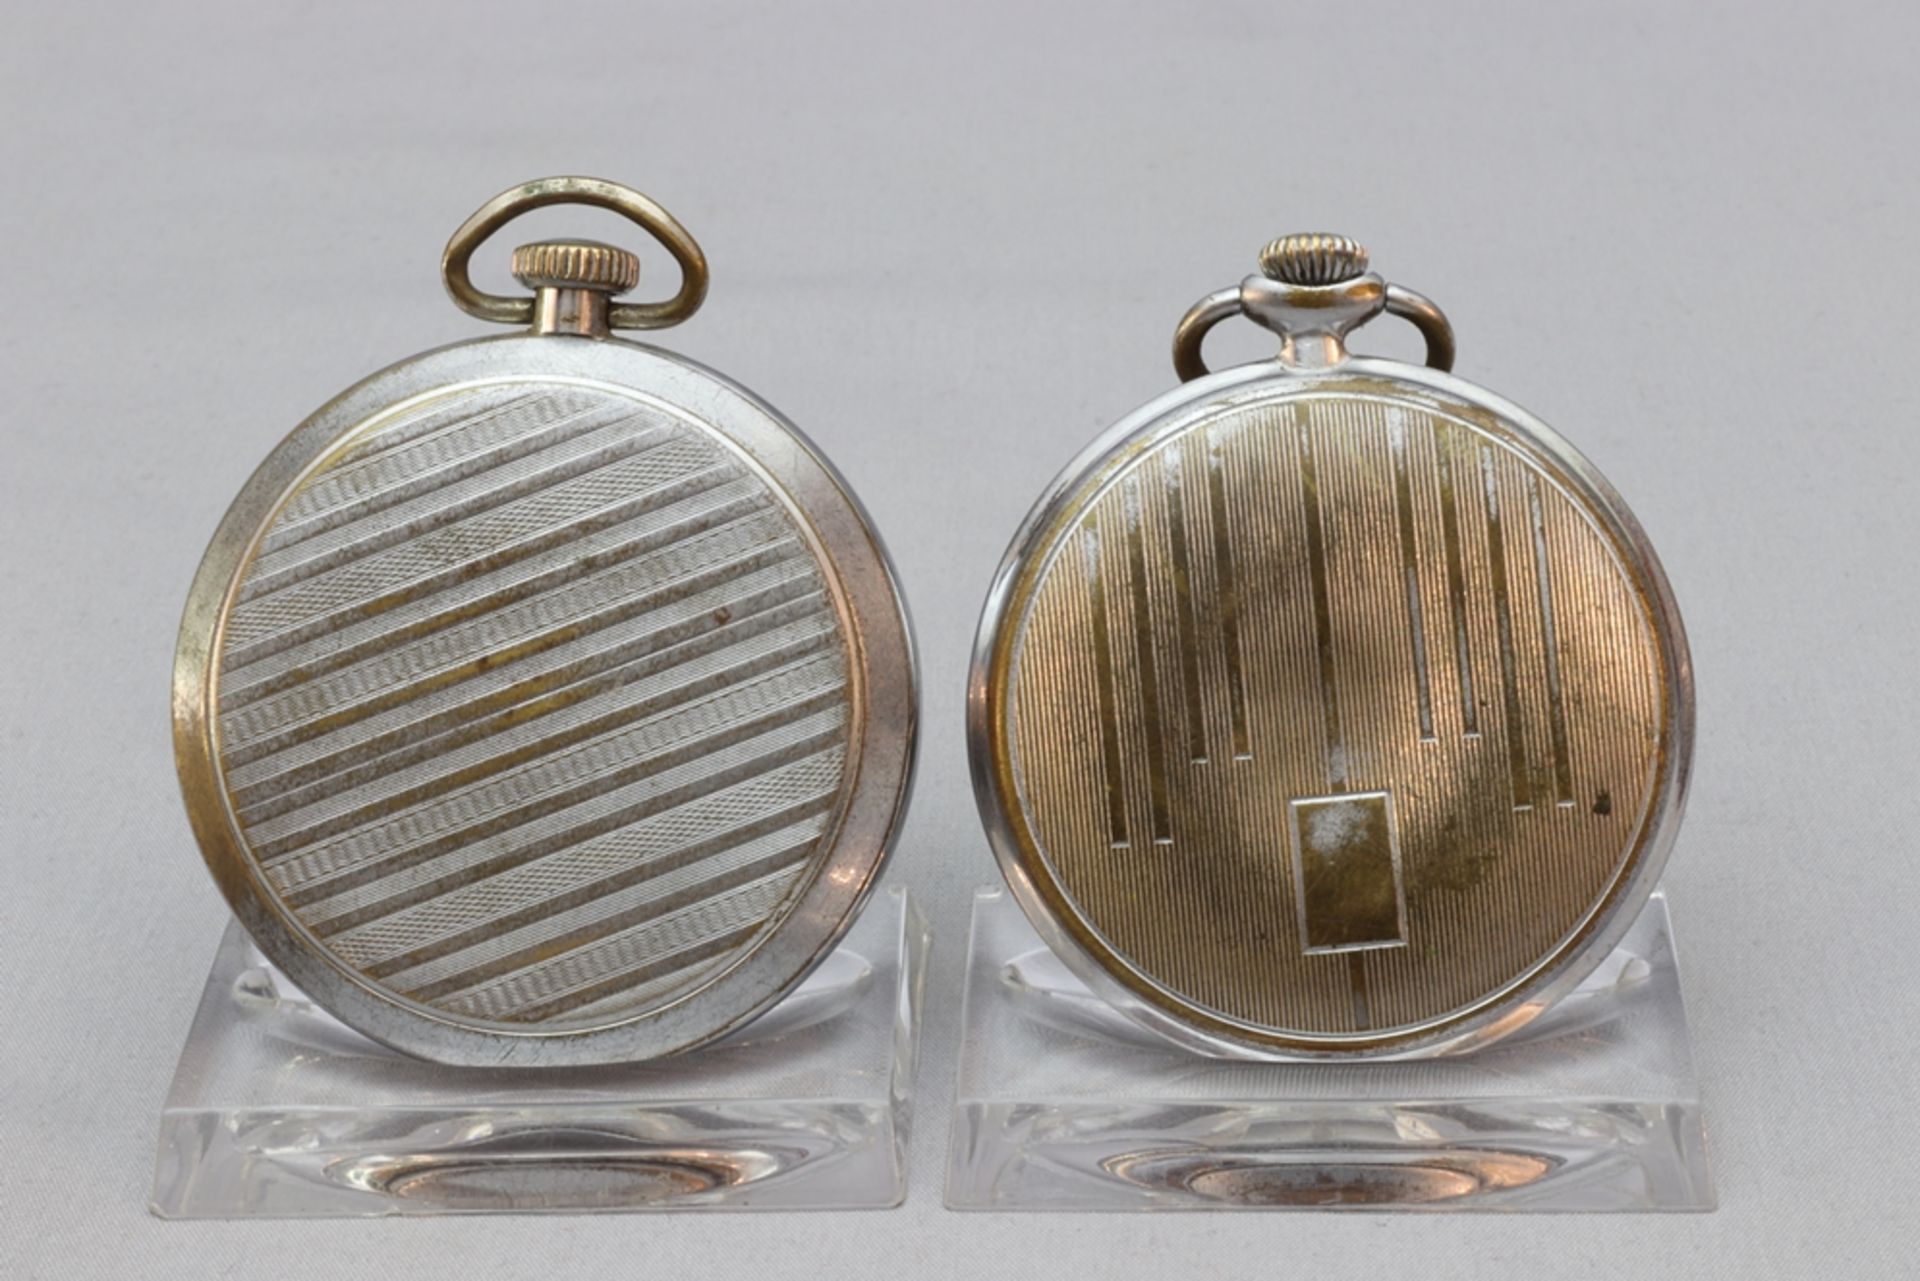 Two men's pocket watches, second half of the 20th century, GDR - Image 2 of 2